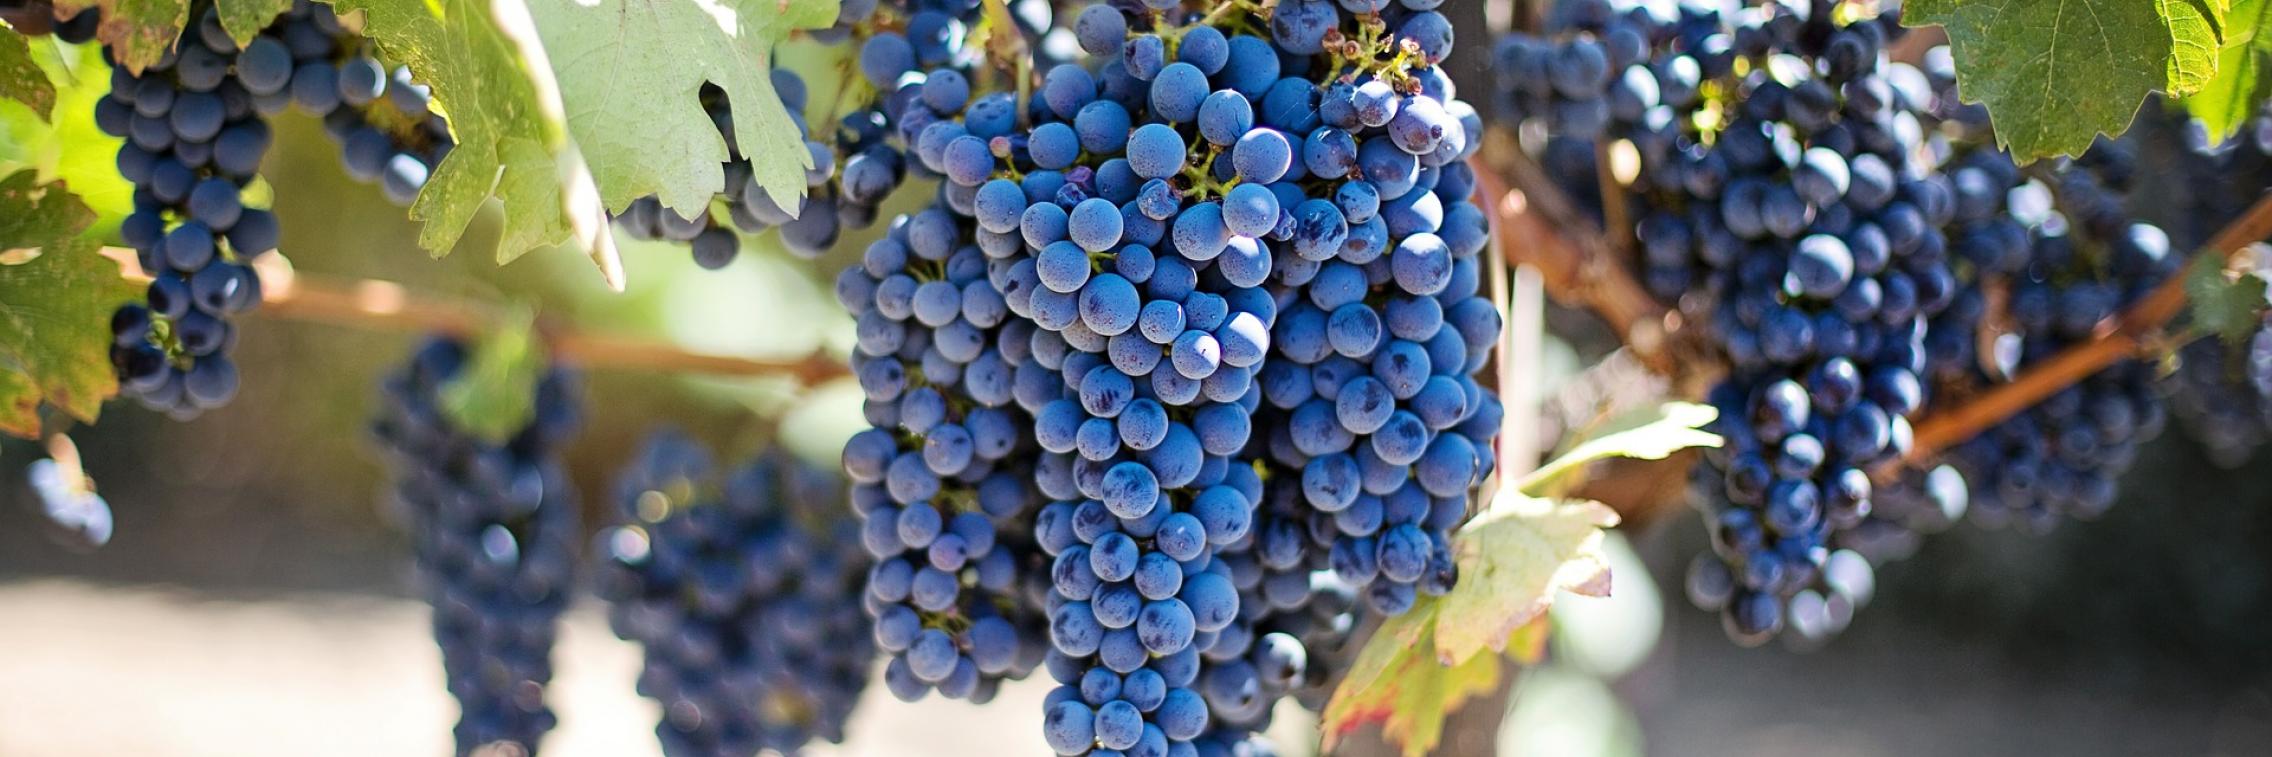 Image of purple grape bunches hanging from a green grapevine